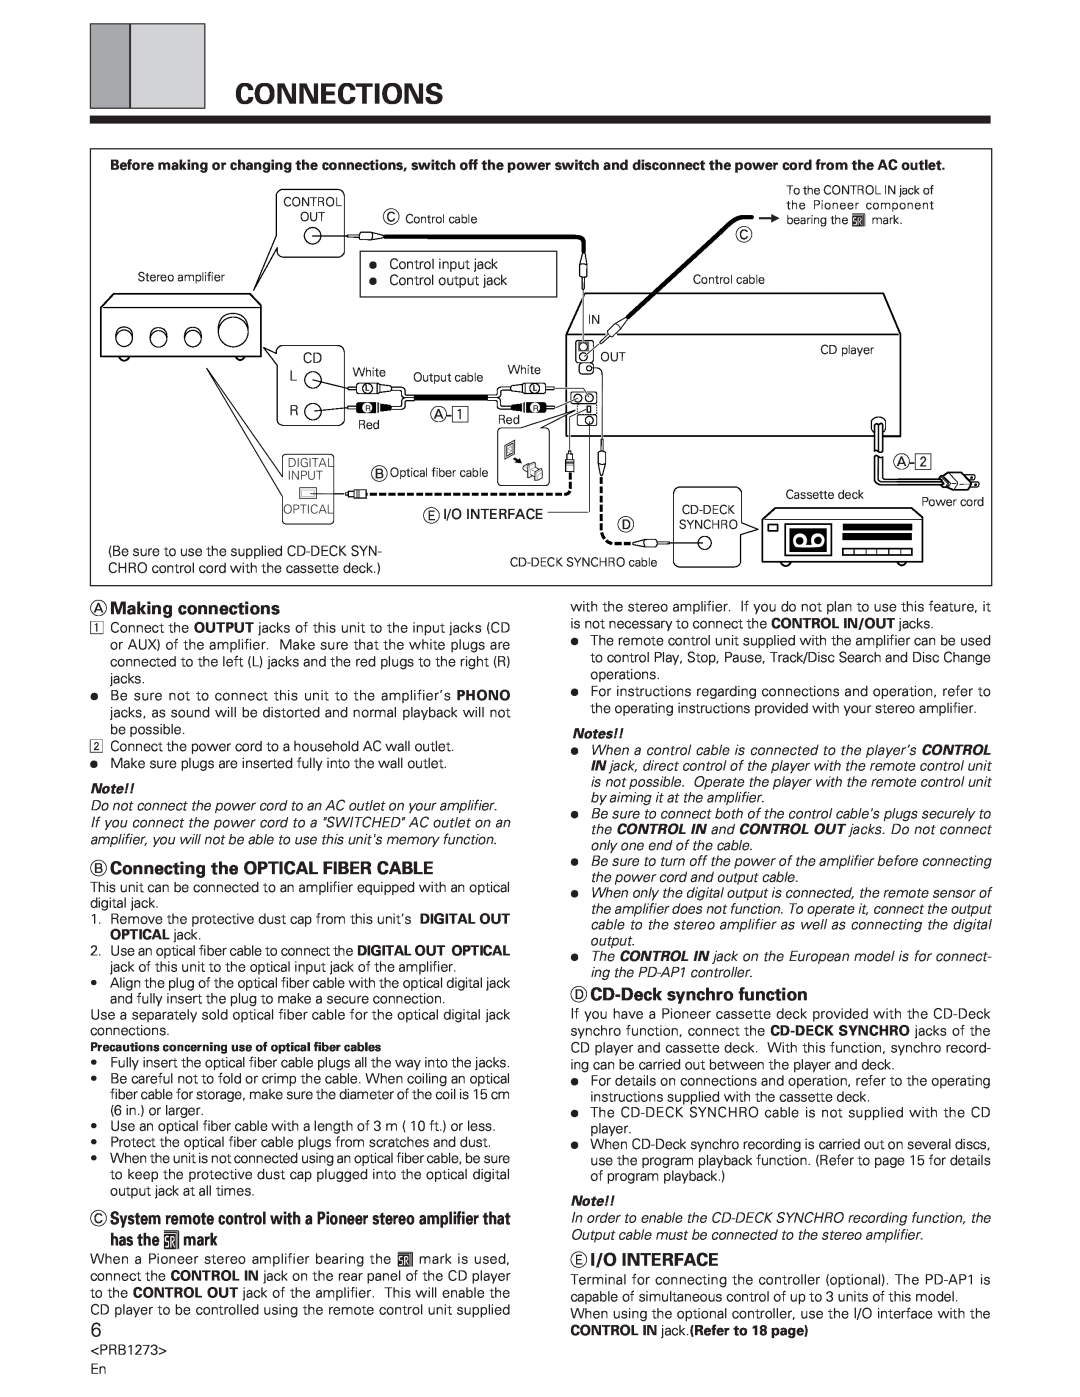 Pioneer PD-F957 Connections, AMaking connections, BConnecting the OPTICAL FIBER CABLE, has the Îmark, Ei/O Interface 